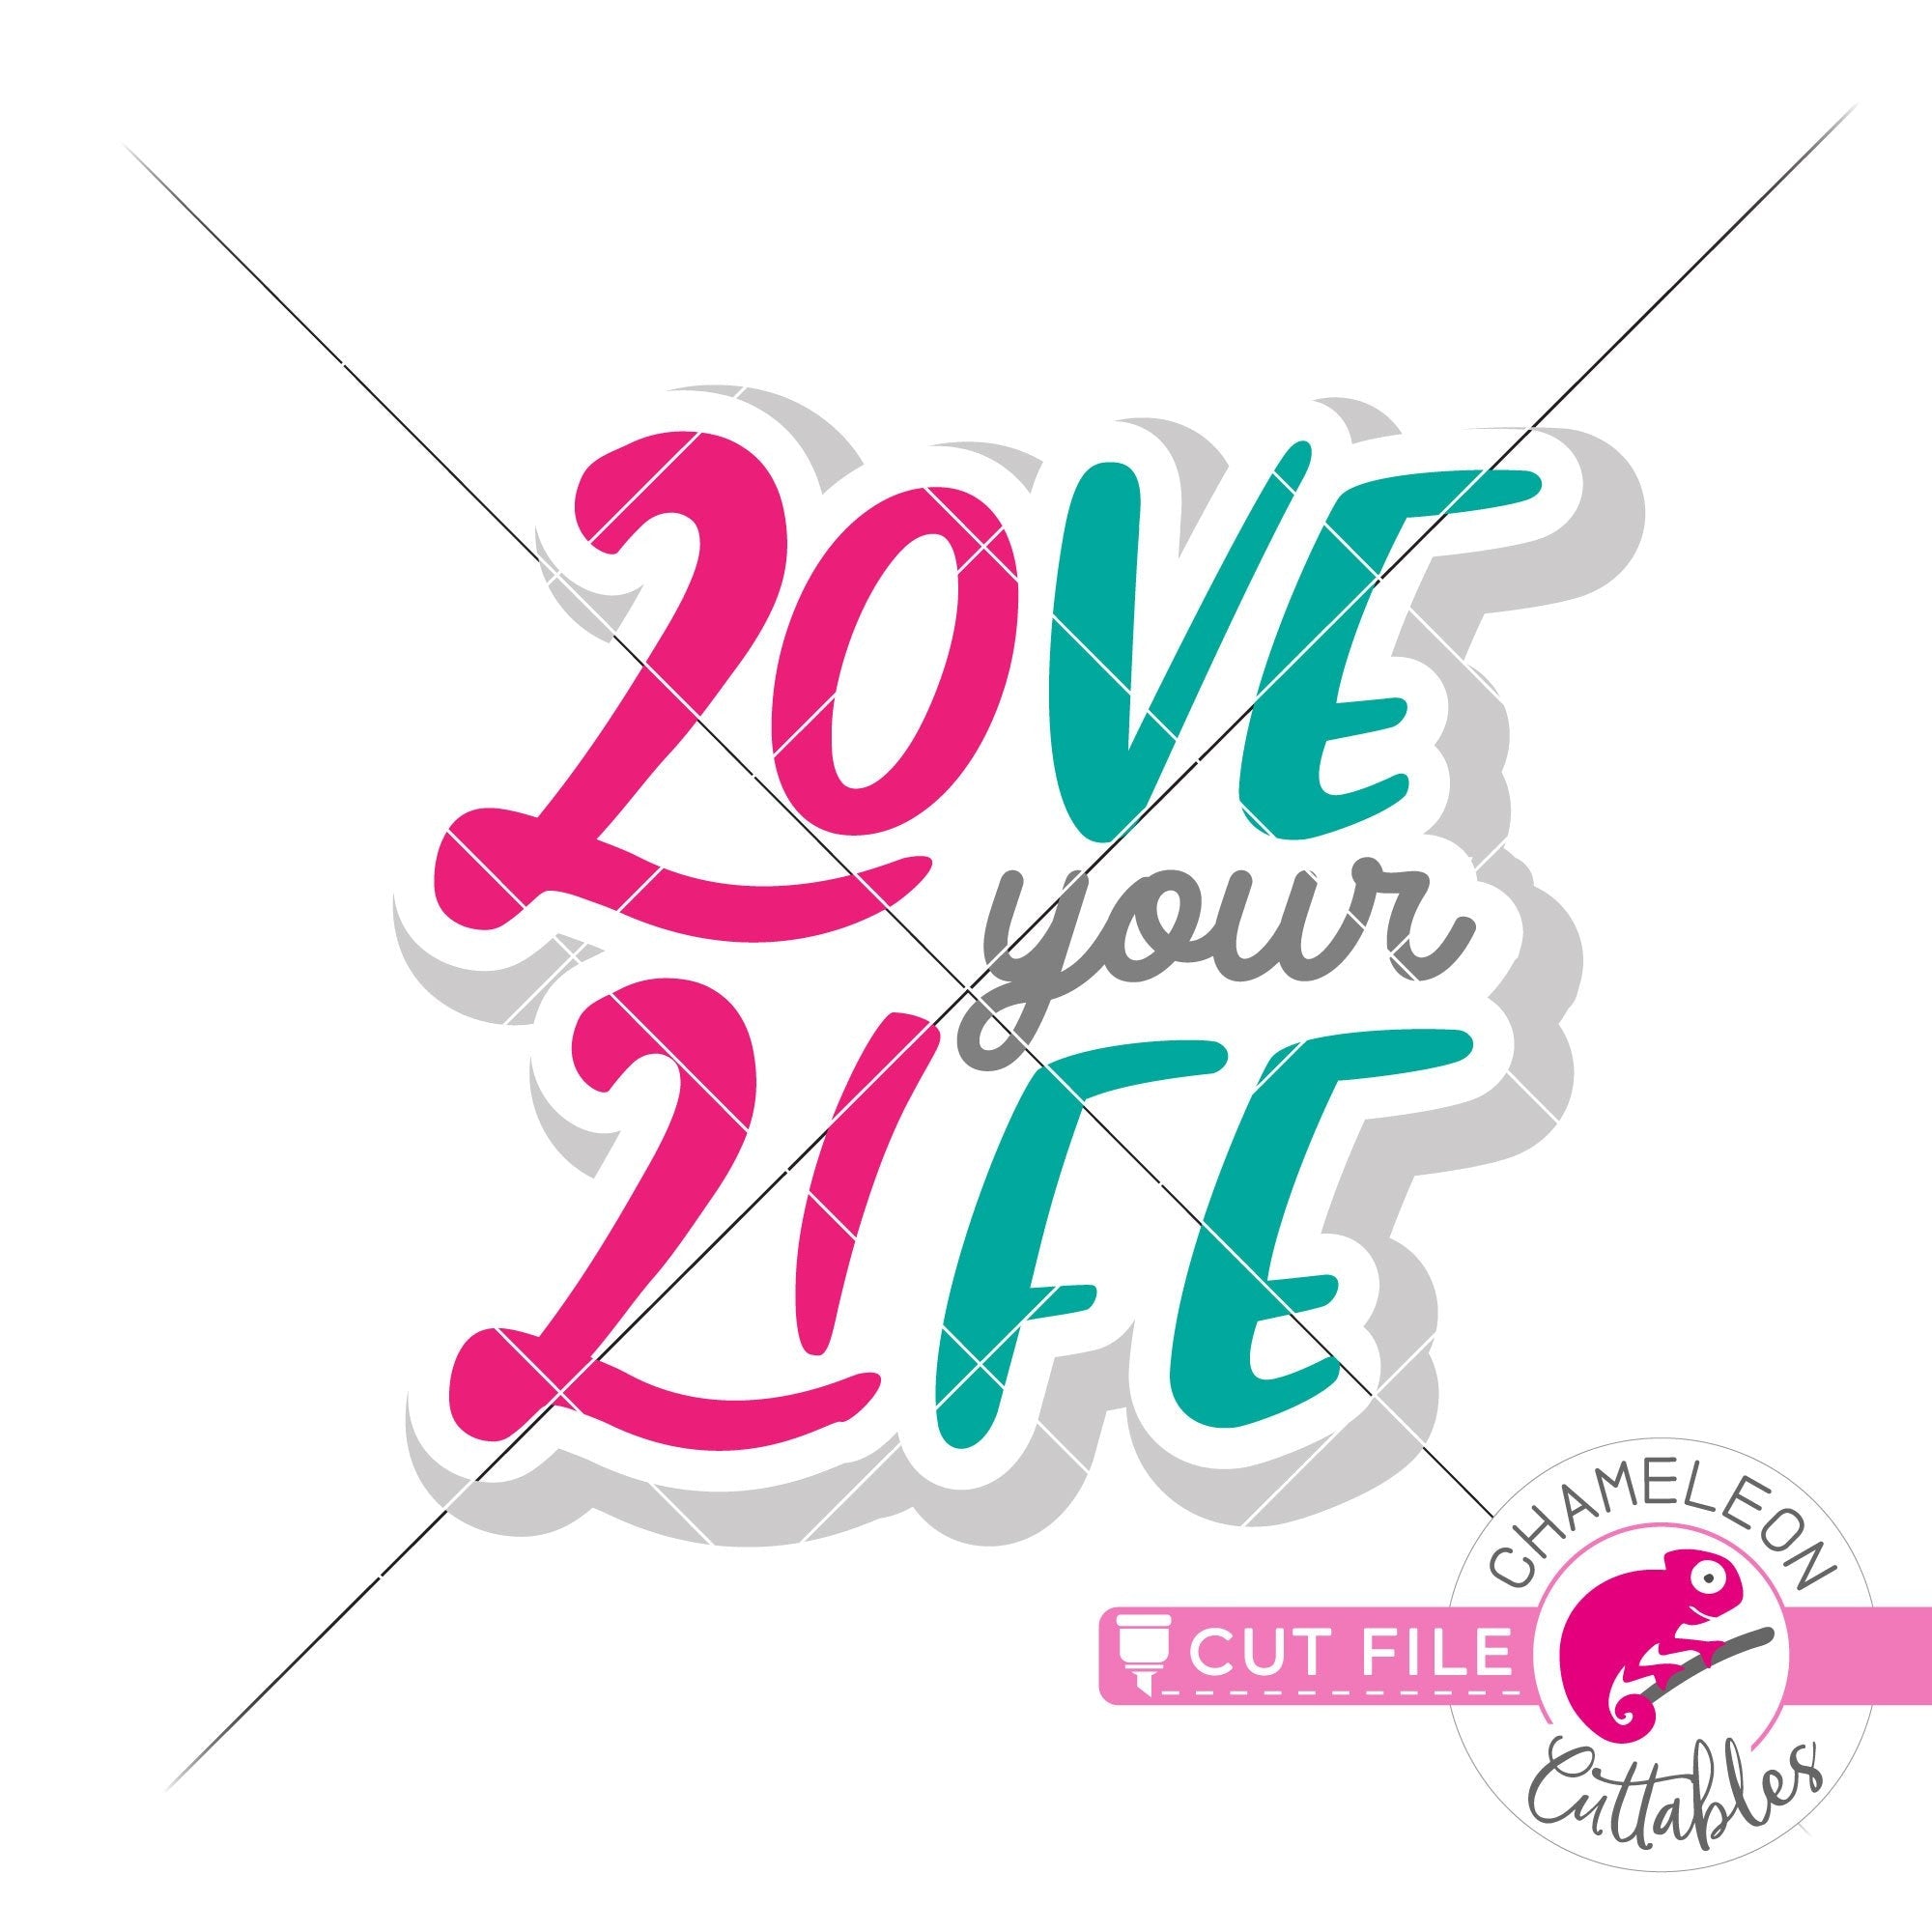 Download Love Your Life 2021 Svg Png Dxf Eps Jpeg Chameleon Cuttables Llc Chameleon Cuttables Llc